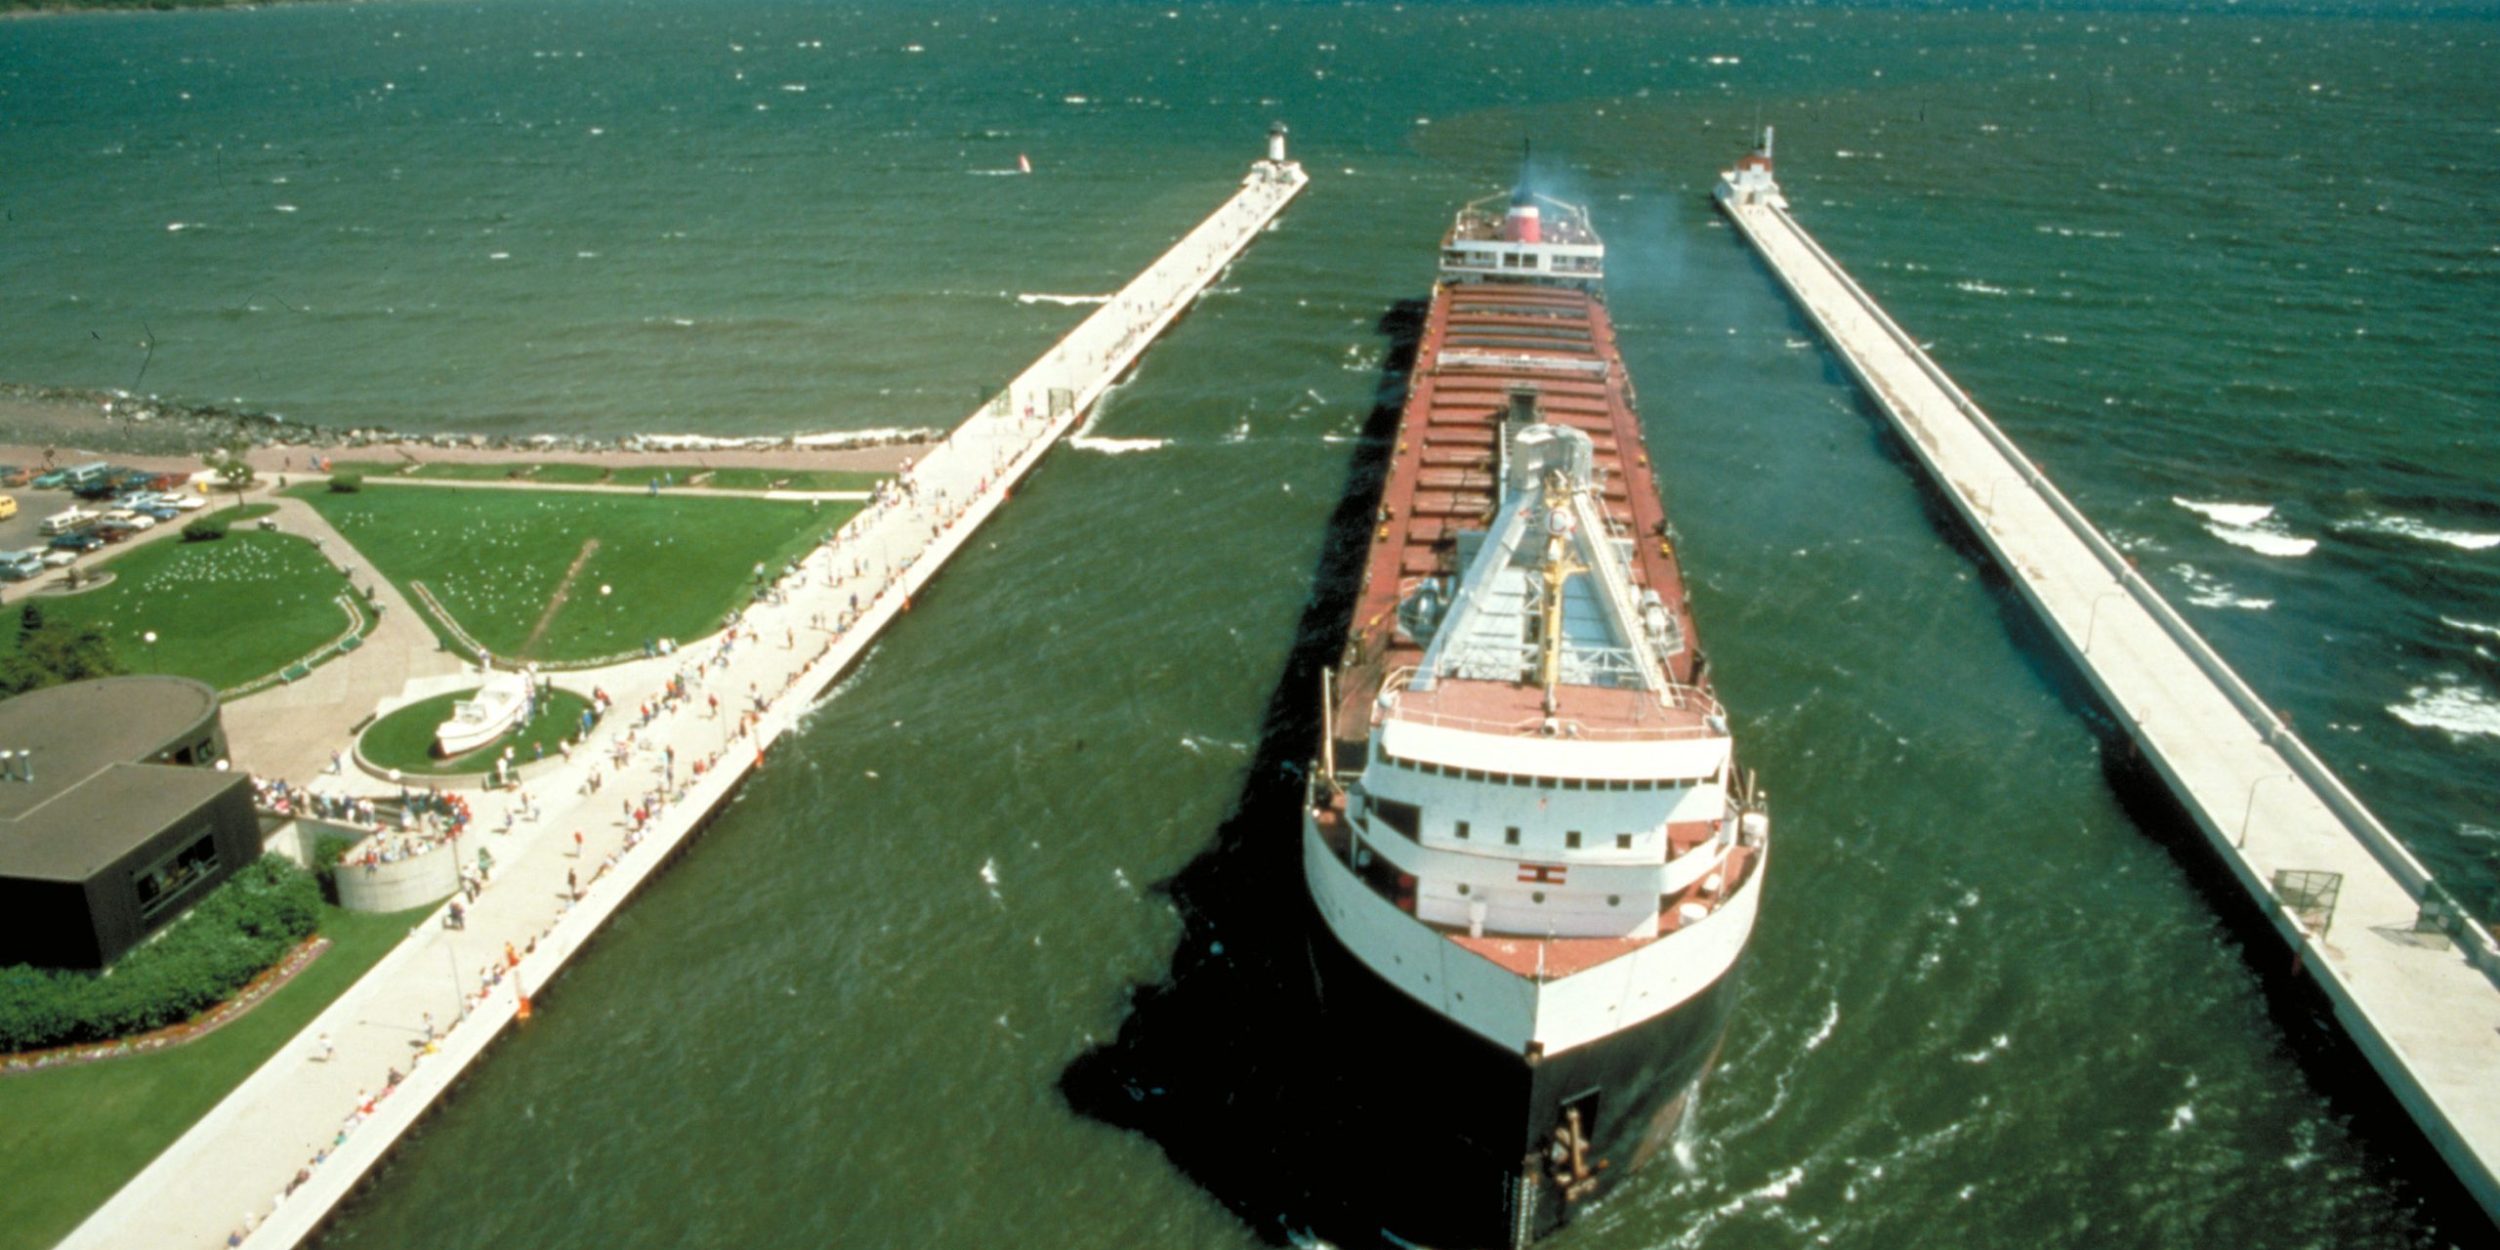 A freighter enters Duluth Harbor in Minnesota.